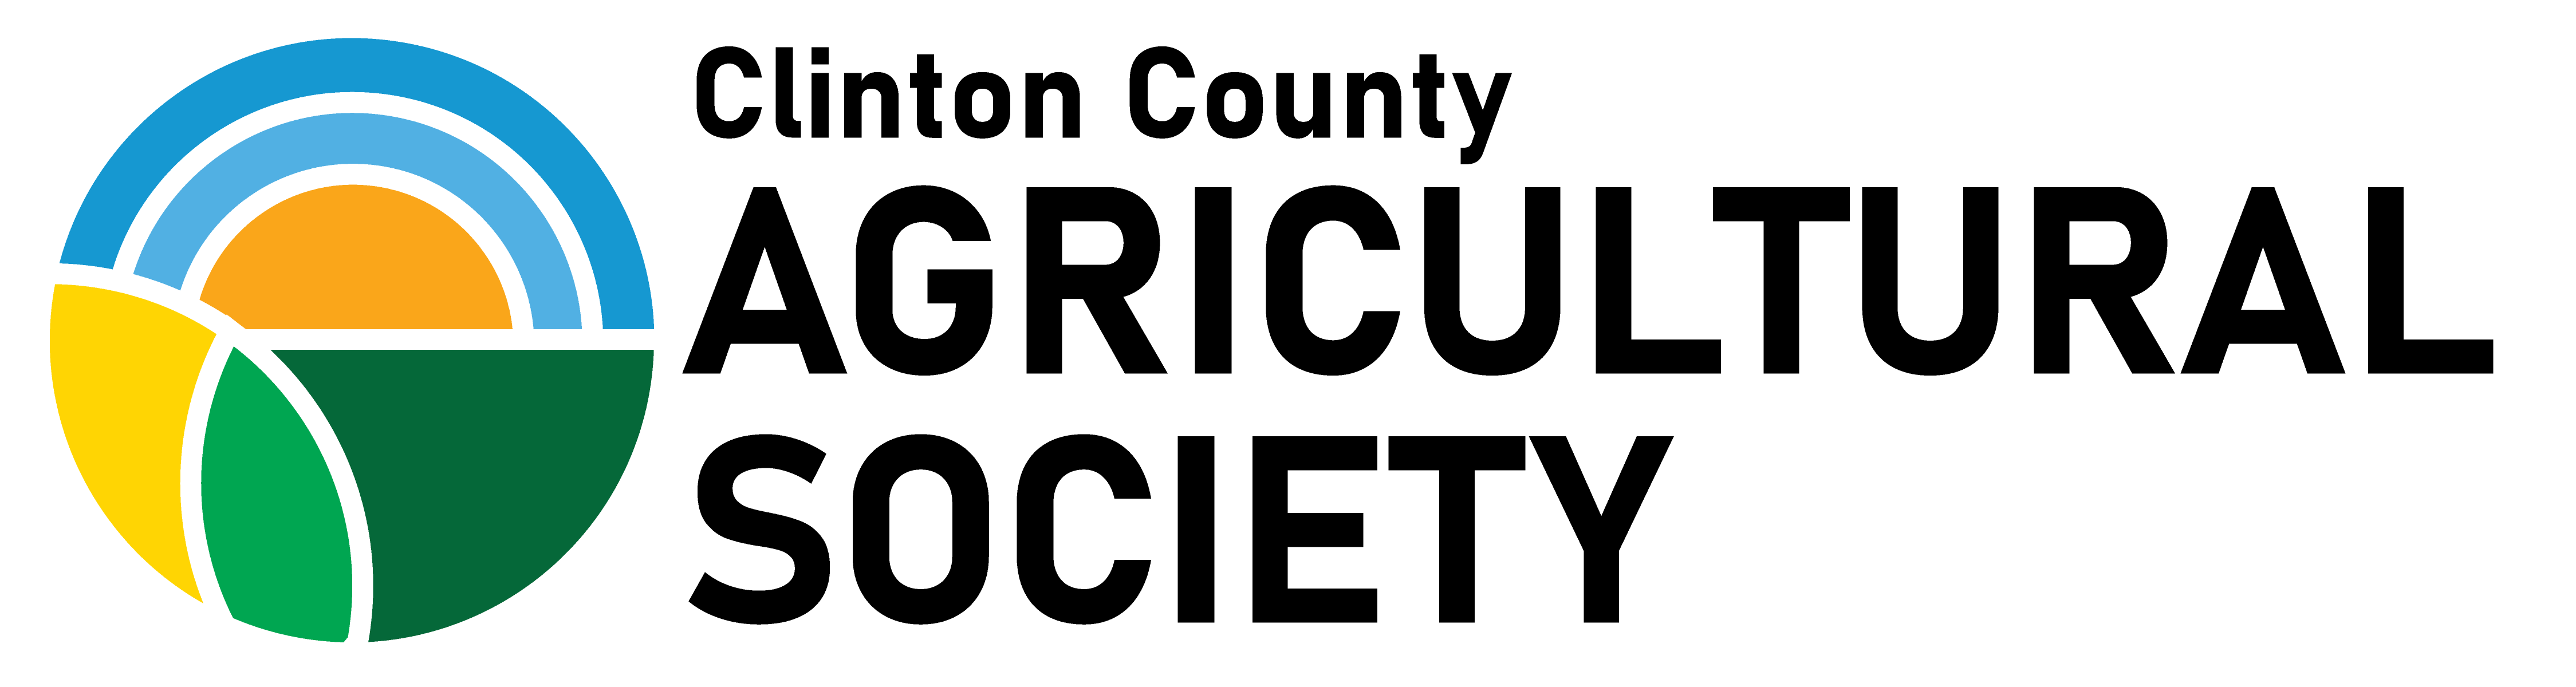 Clinton County Agricultural Society